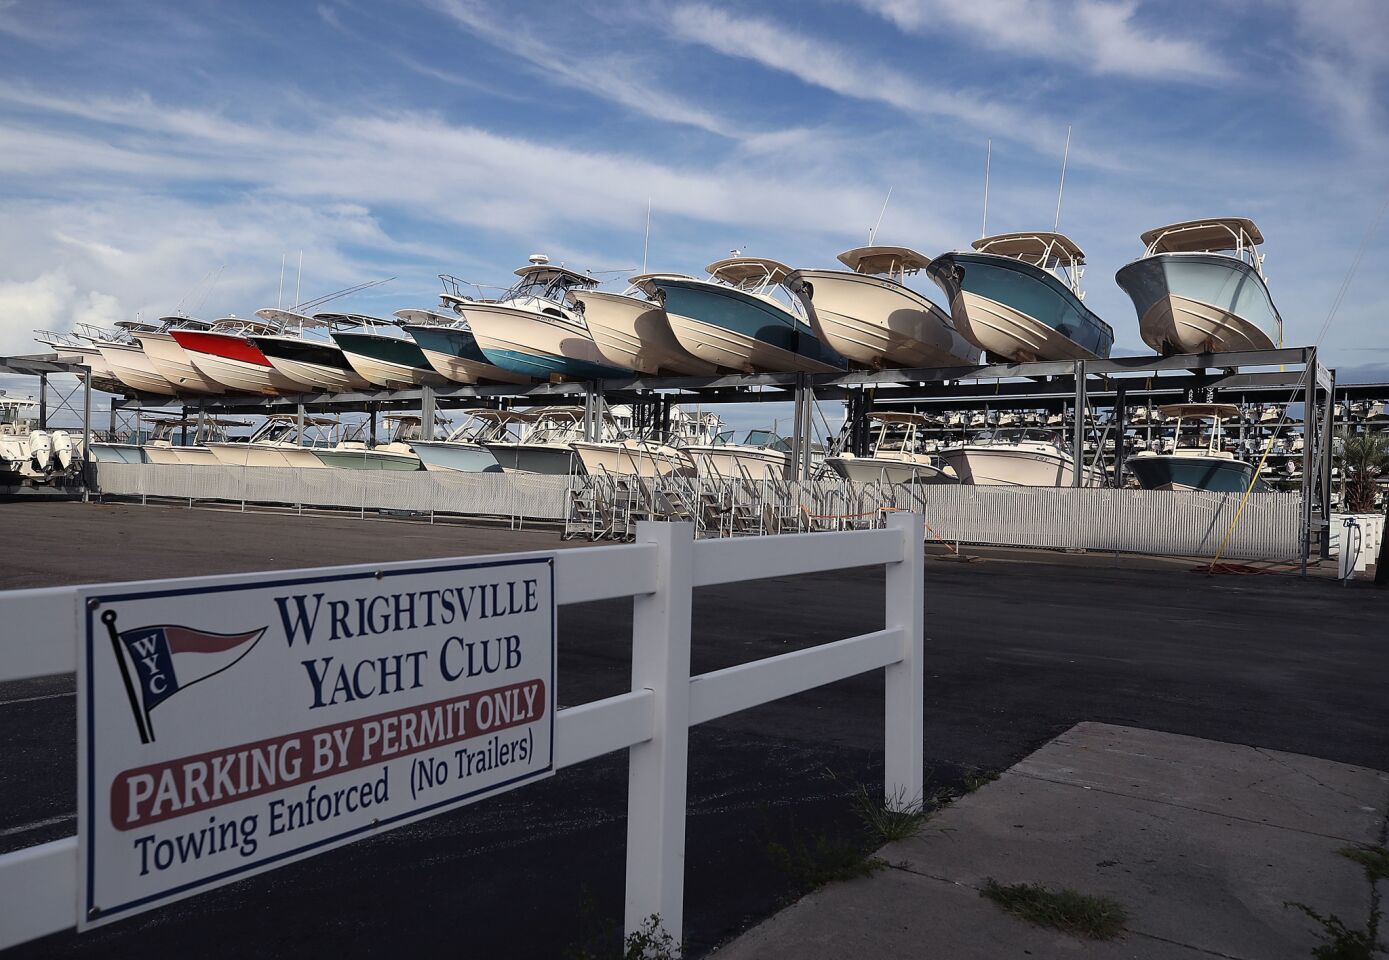 Boats are dry-docked at the Wrightsville Yacht Club on Wednesday in Wrightsville Beach, N.C.